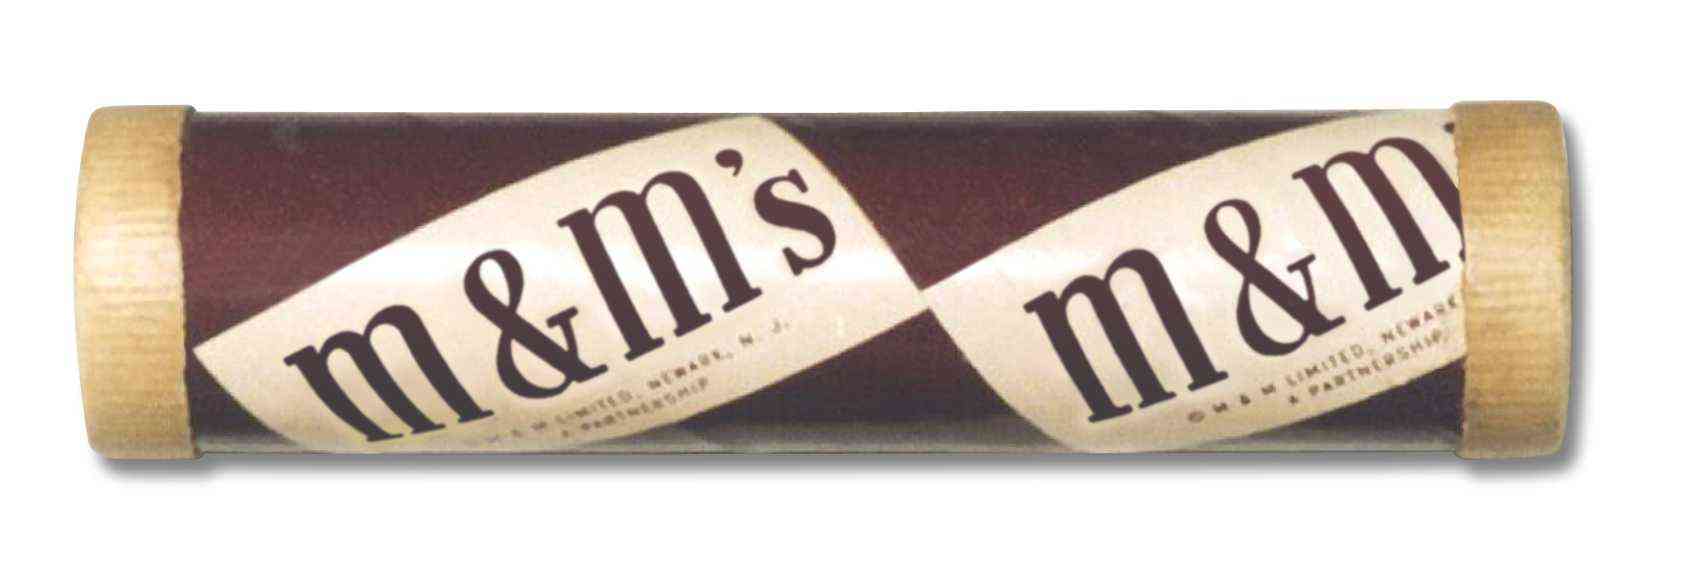 M&M Candy Logo - How World War II Changed Everything - Even Our Taste for Candy